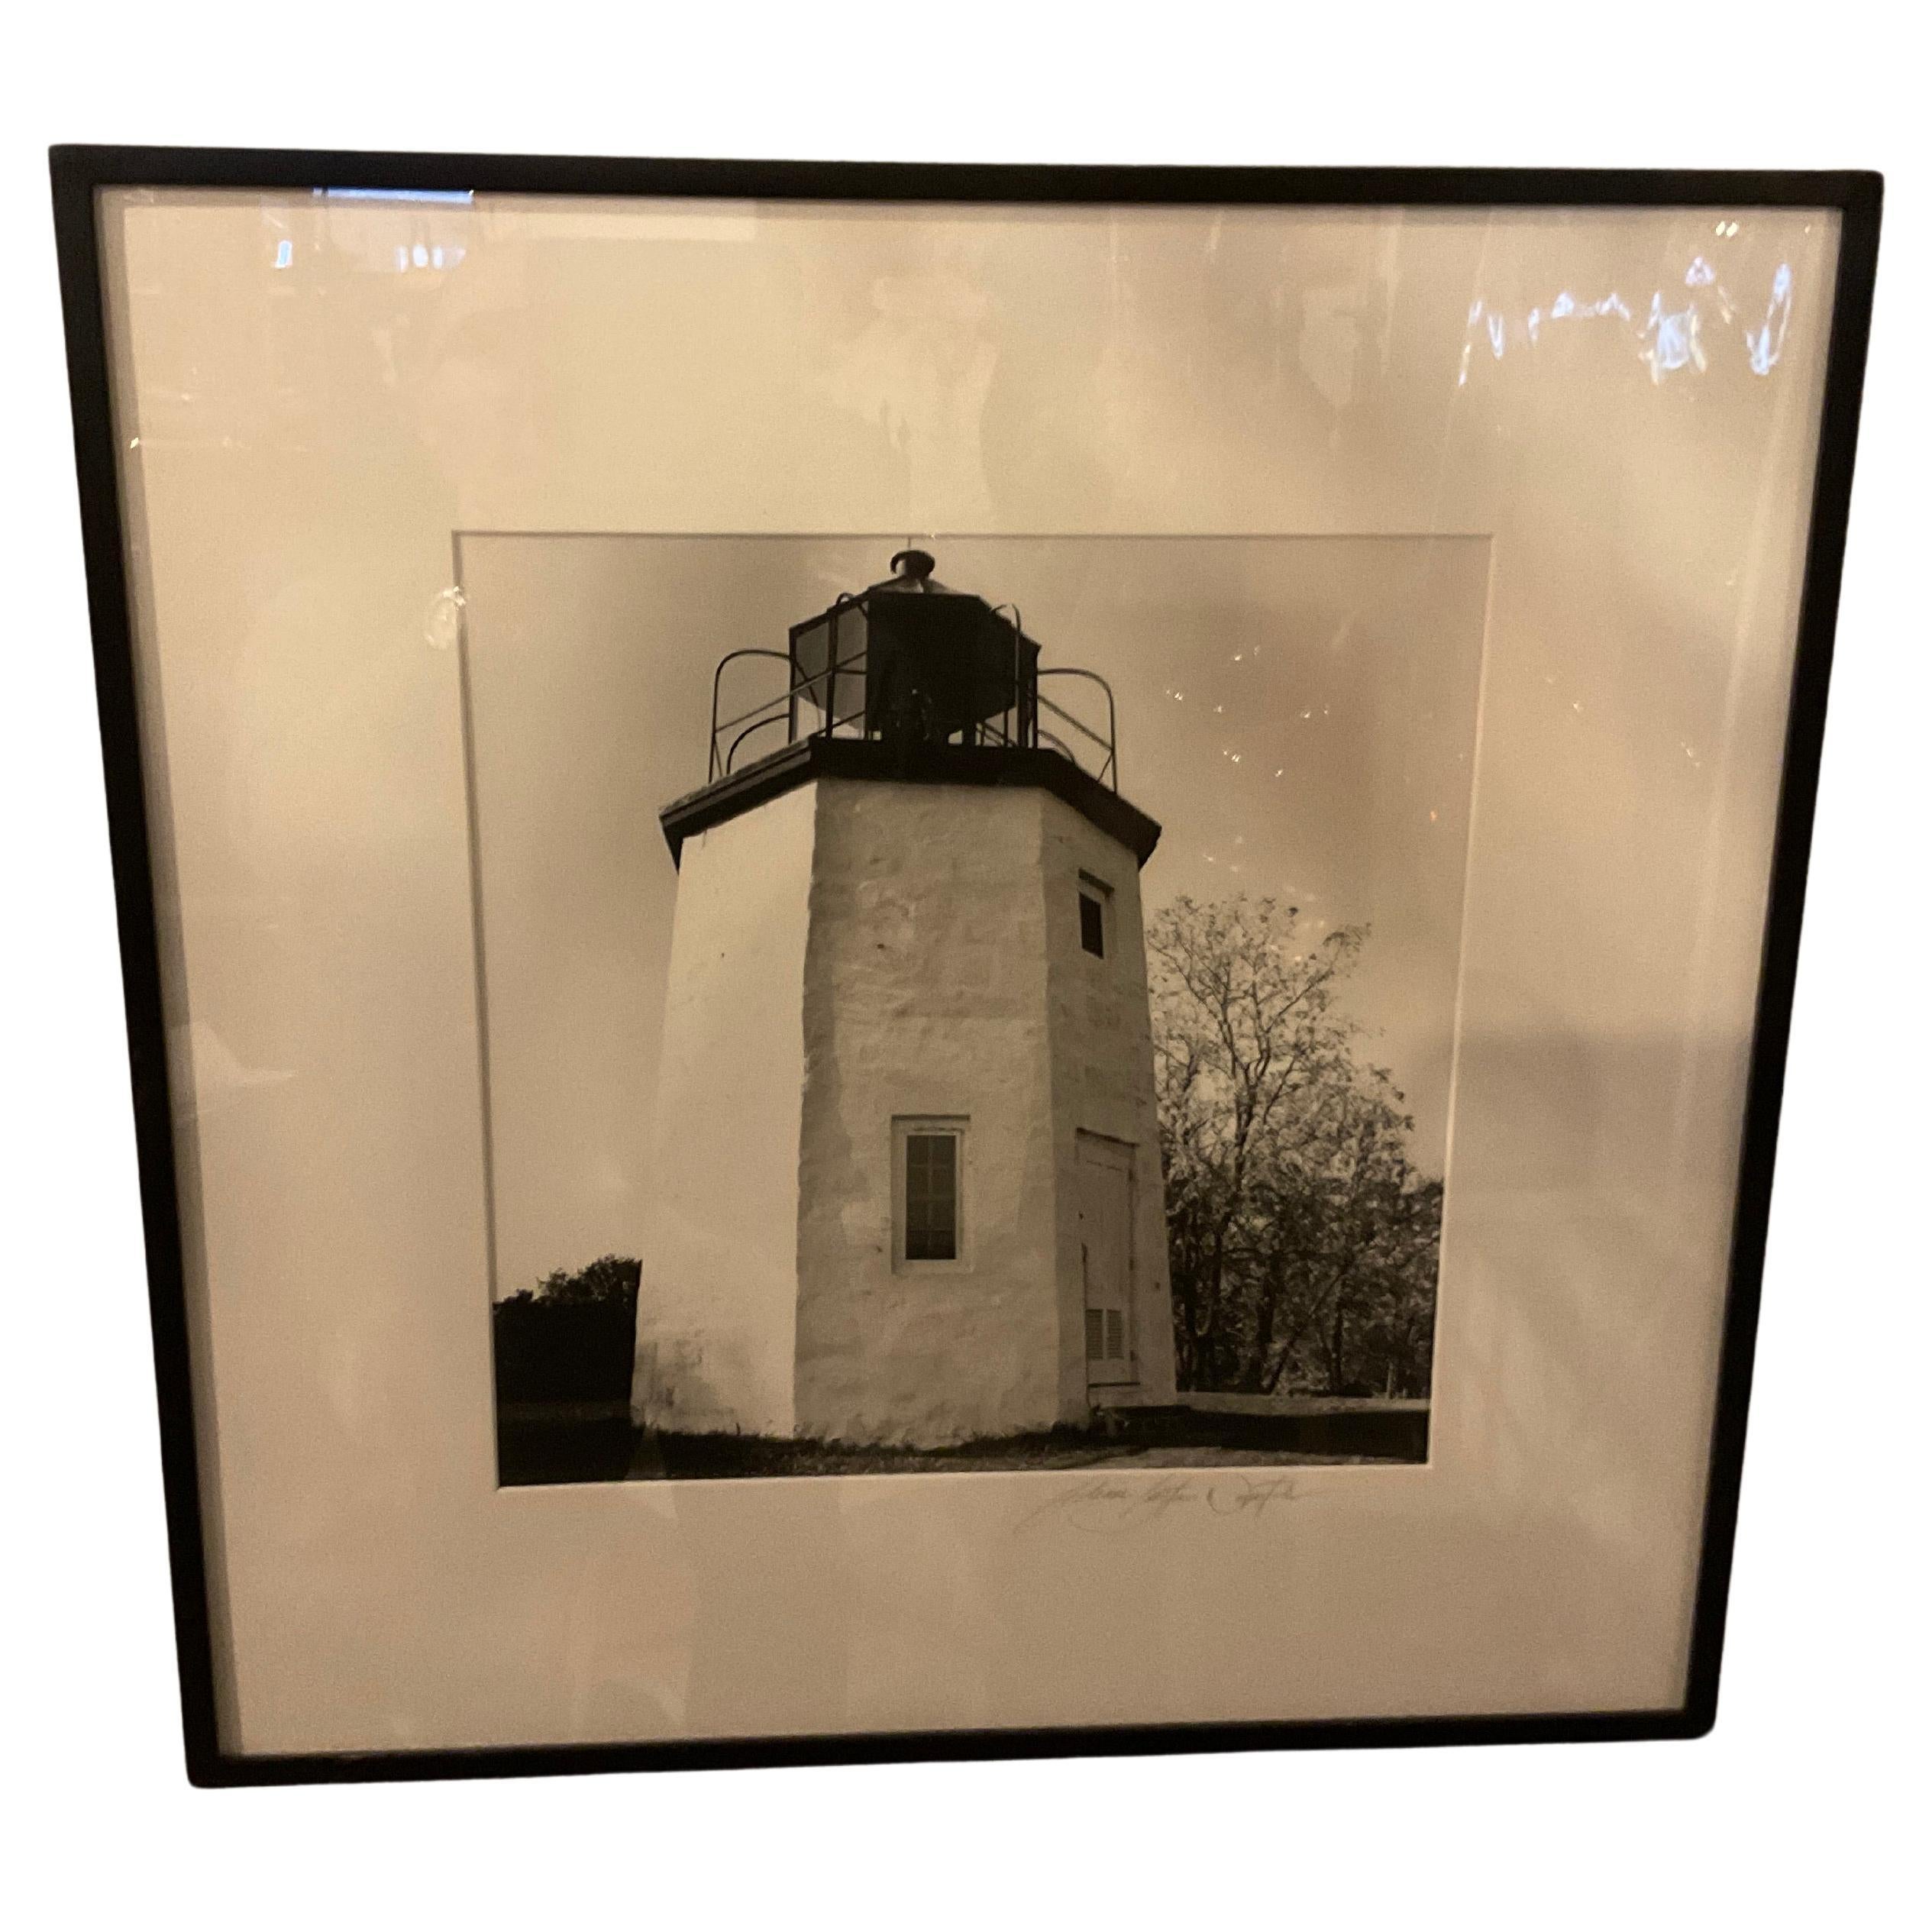 Black And White Photo Of A Lighthouse By Ileane Bernstein Naprstek 